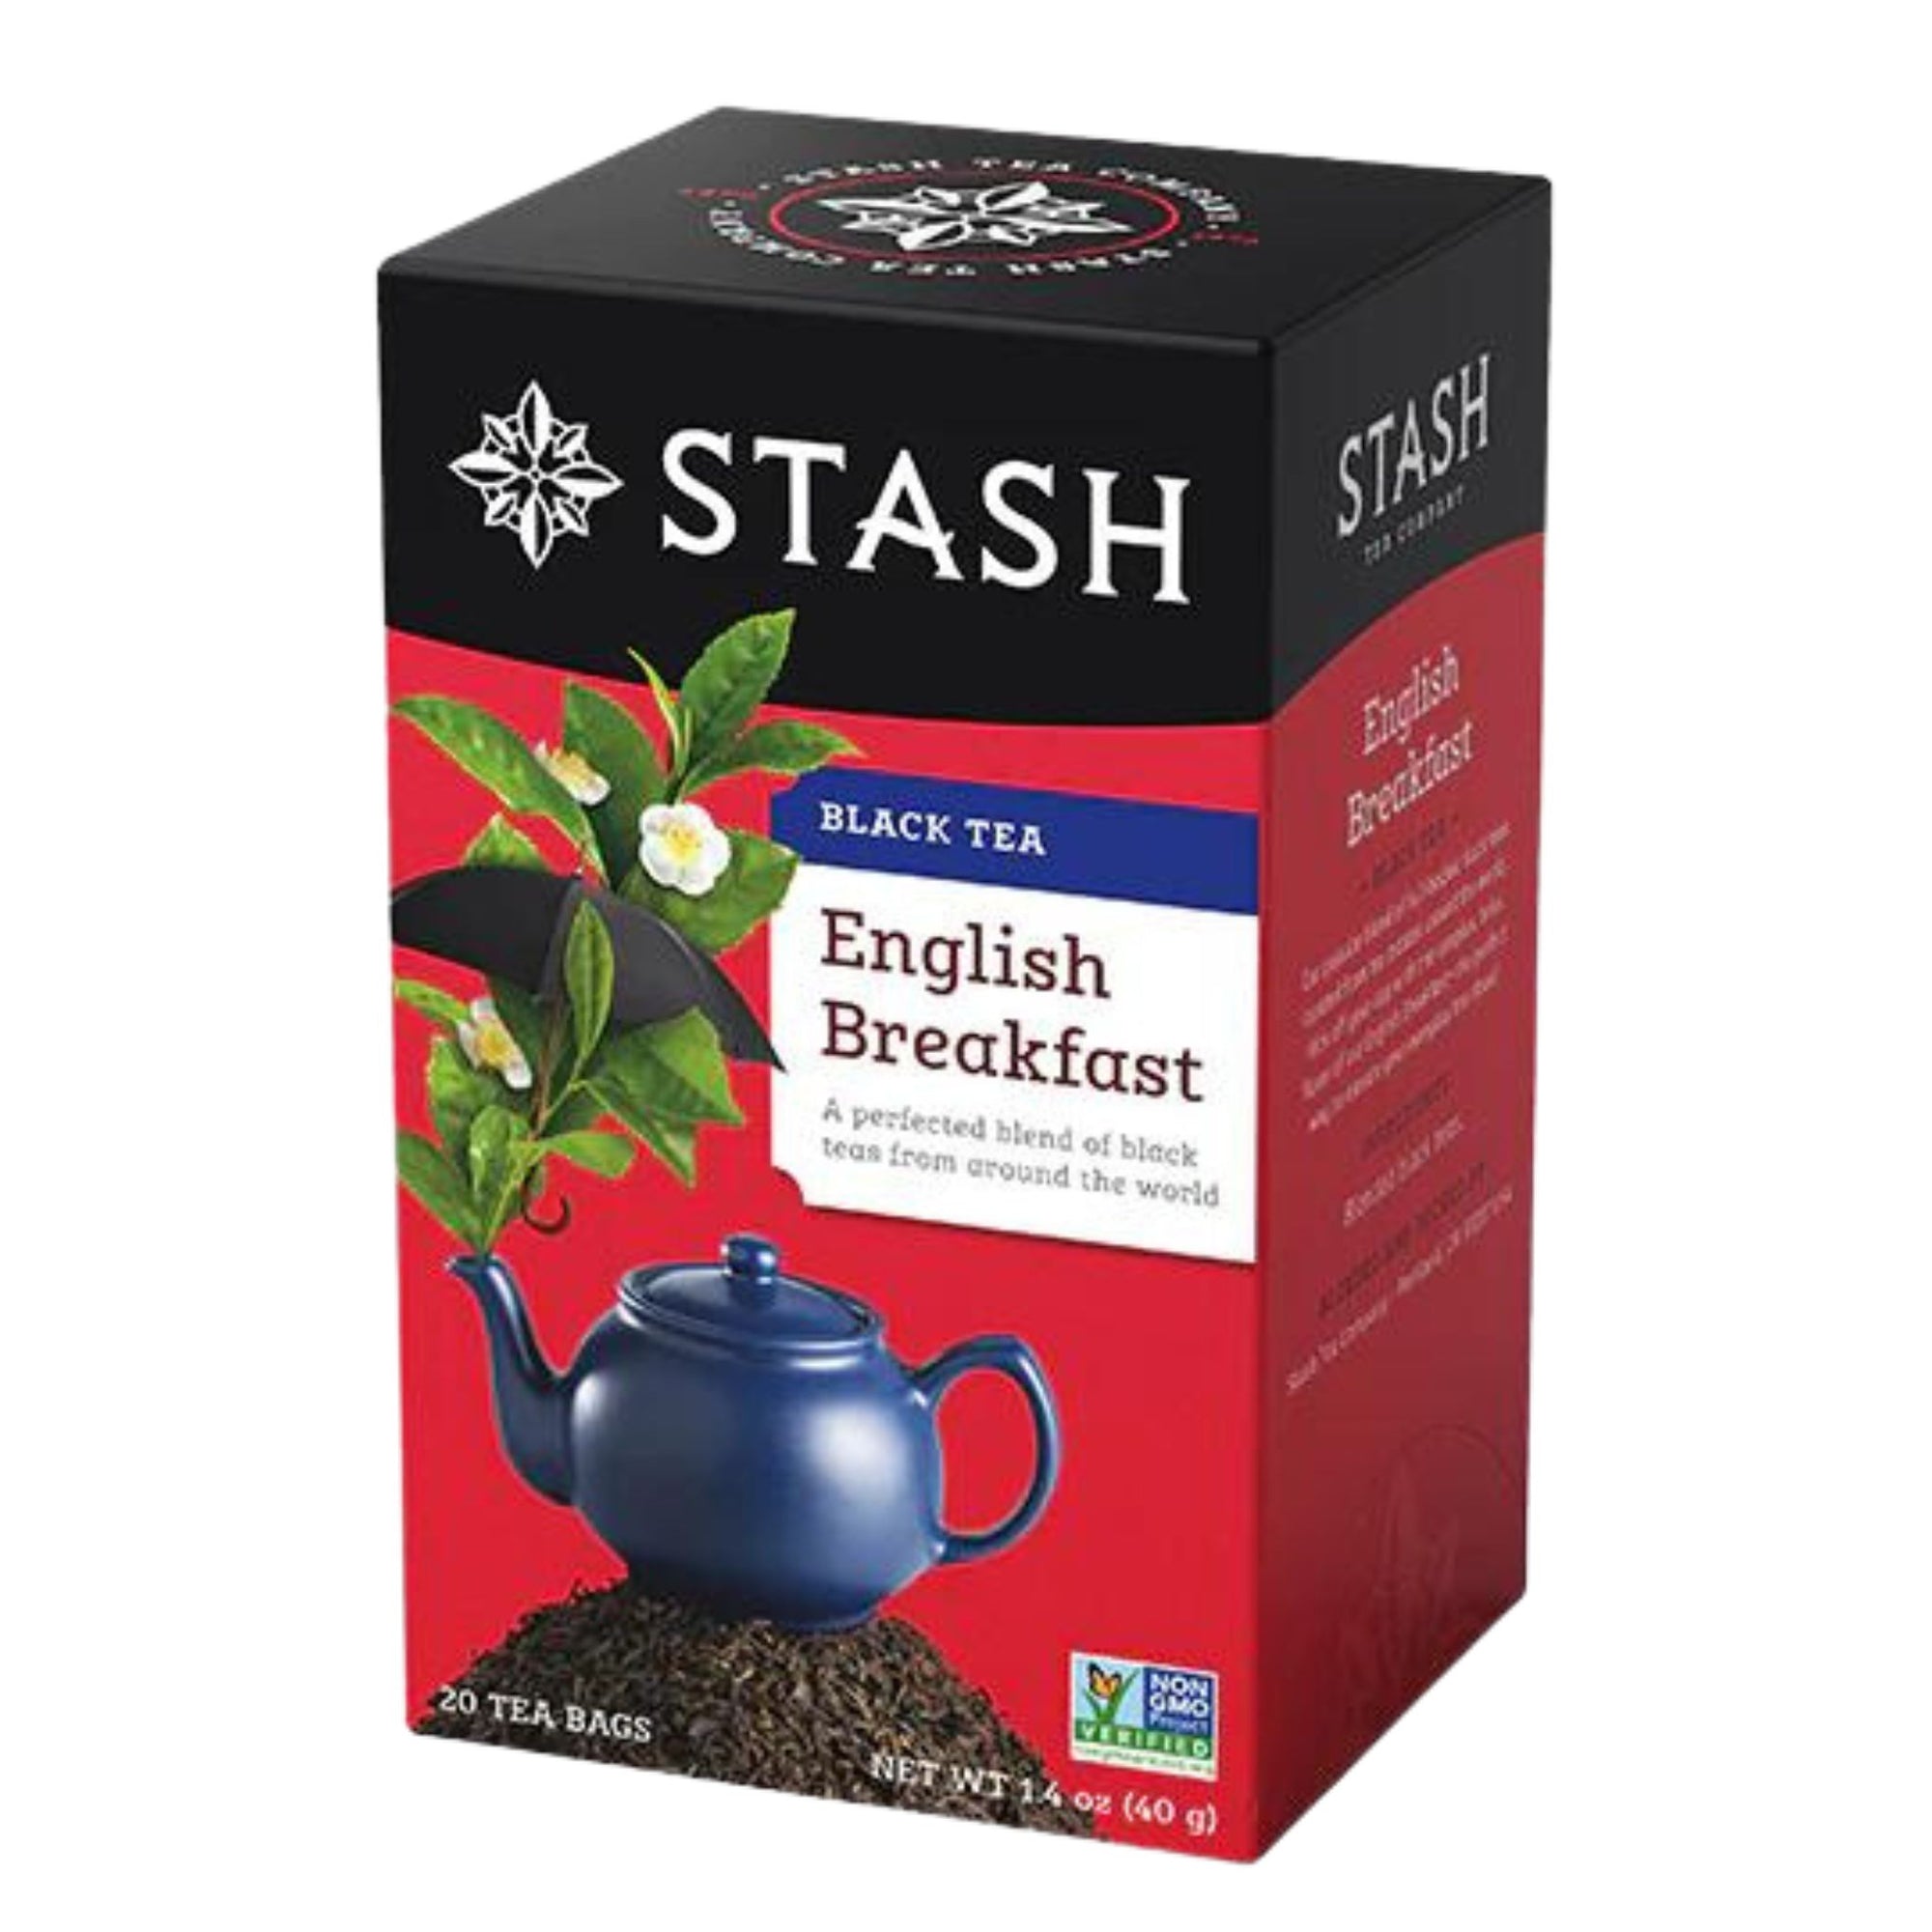 Stash English Breakfast Black Tea - 20 Tea bags in a box - A perfected blend of black teas from around the world 